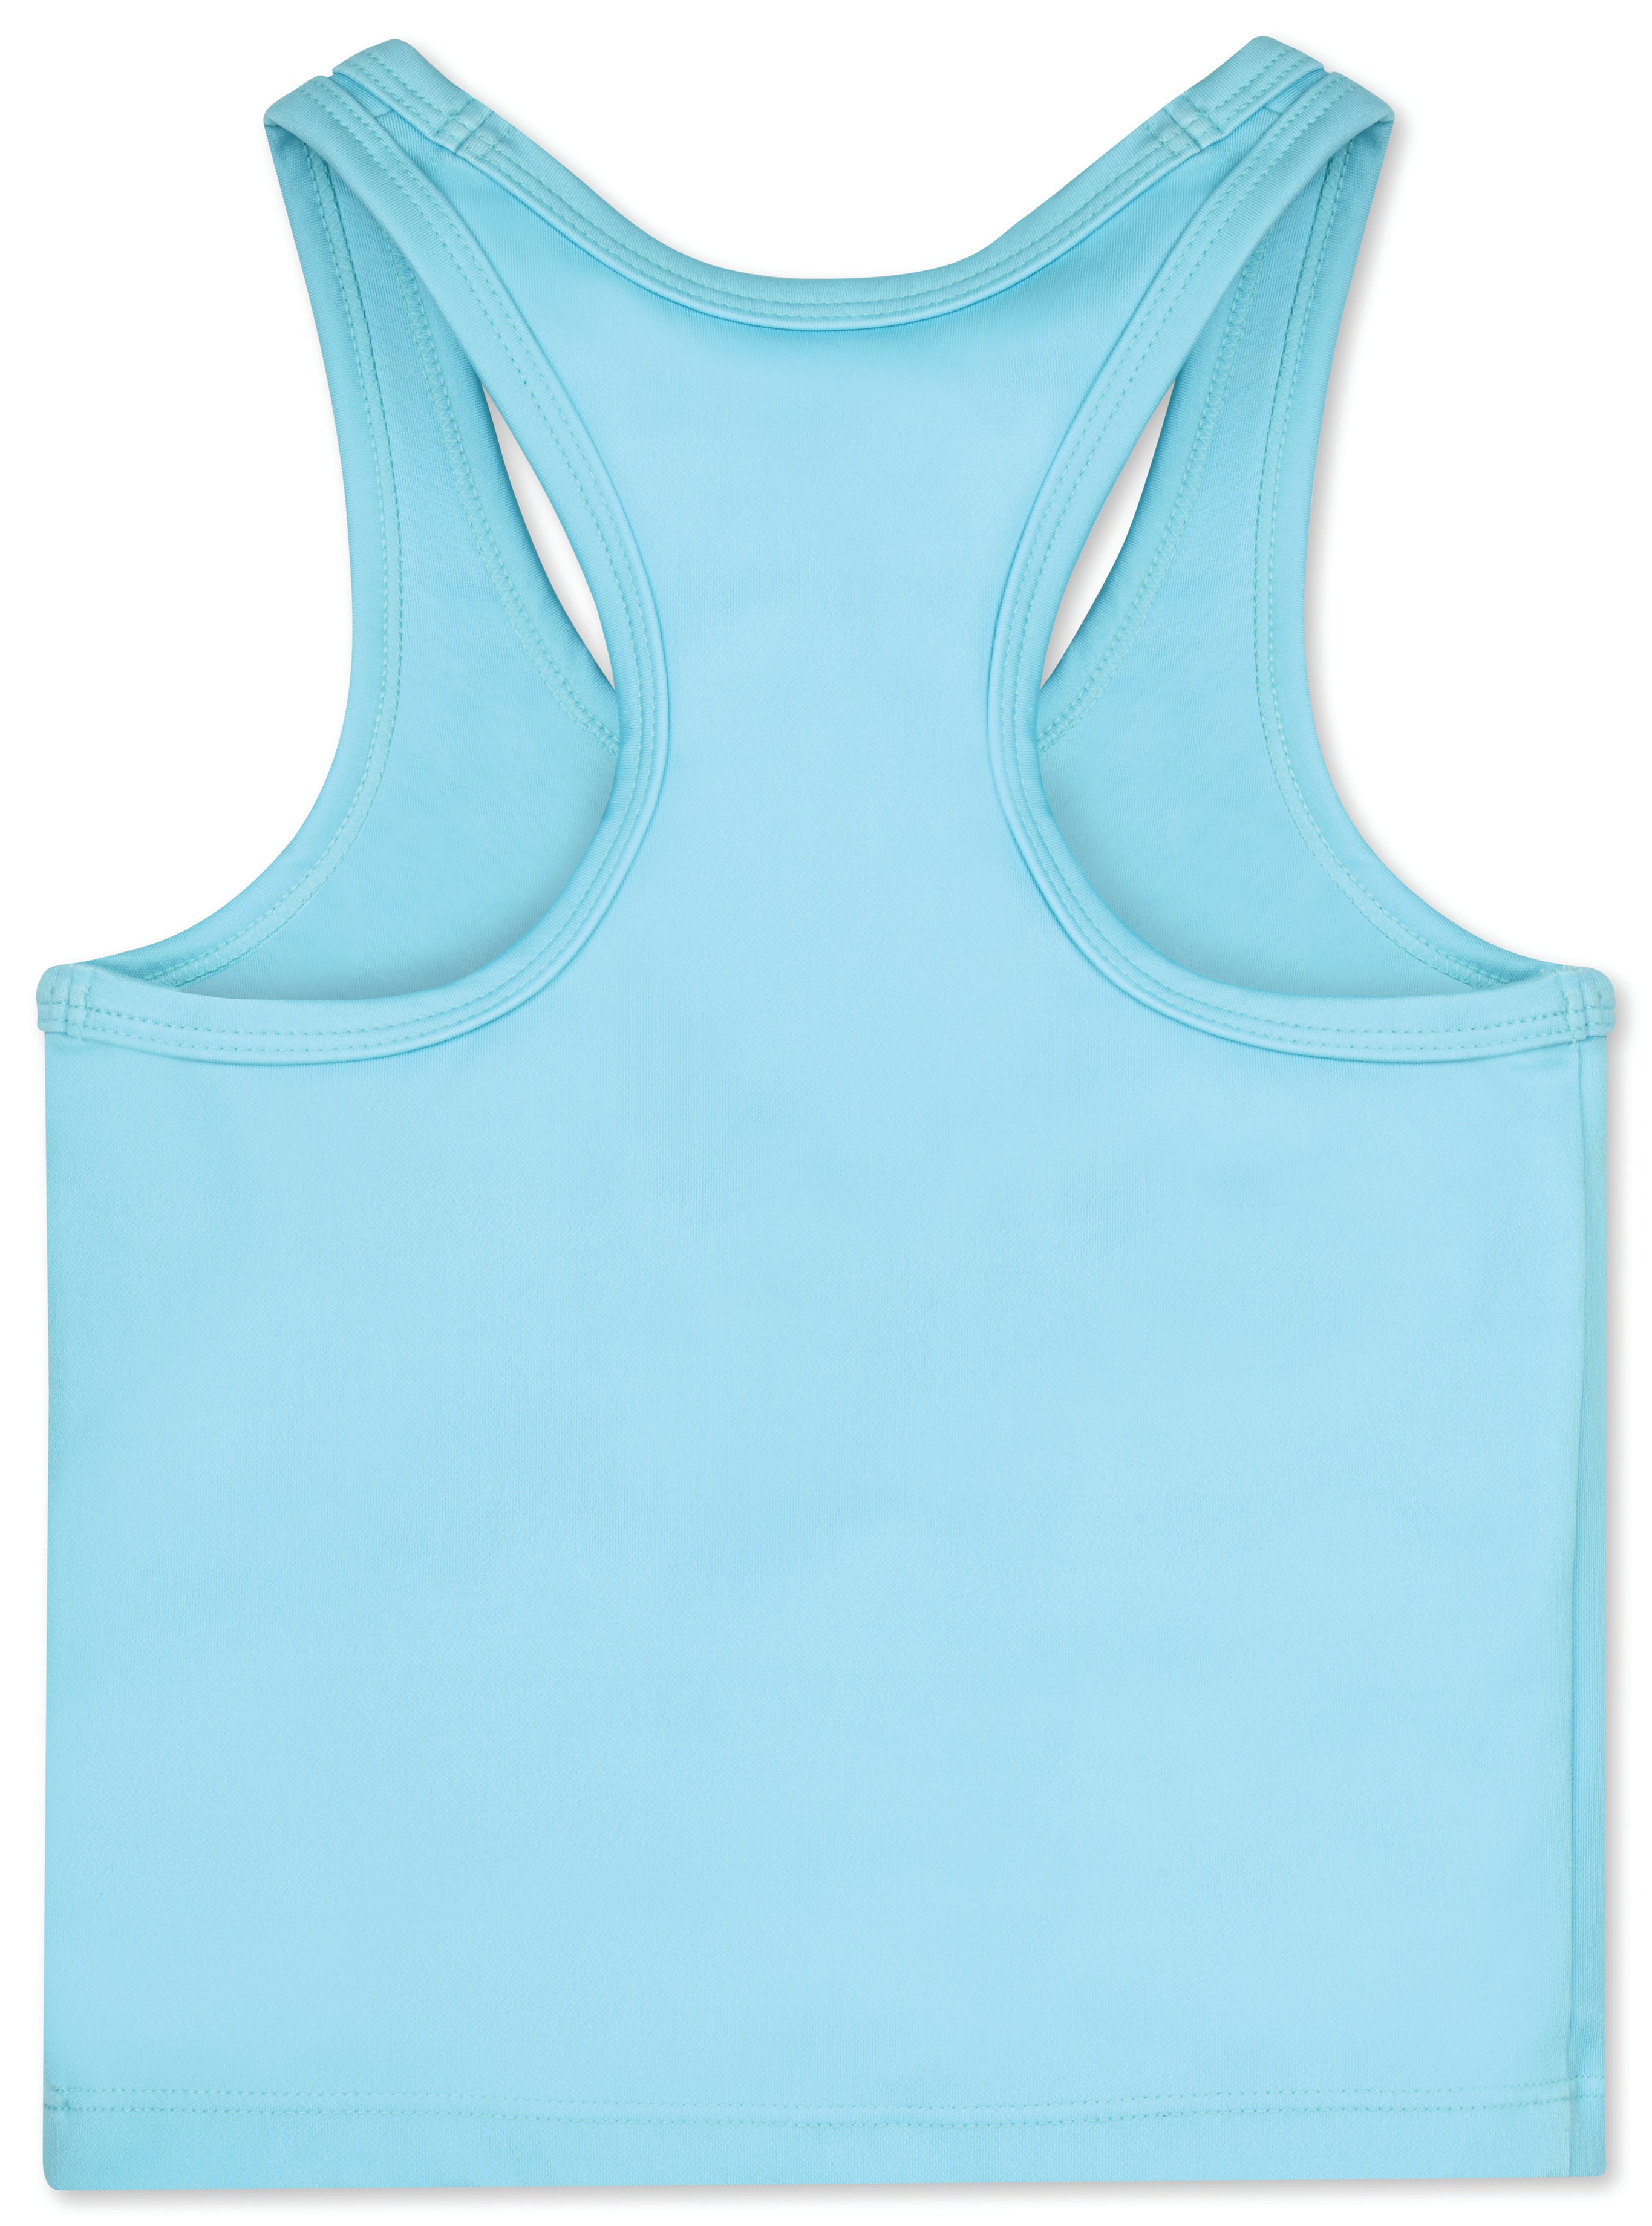 Blue Athletic Top